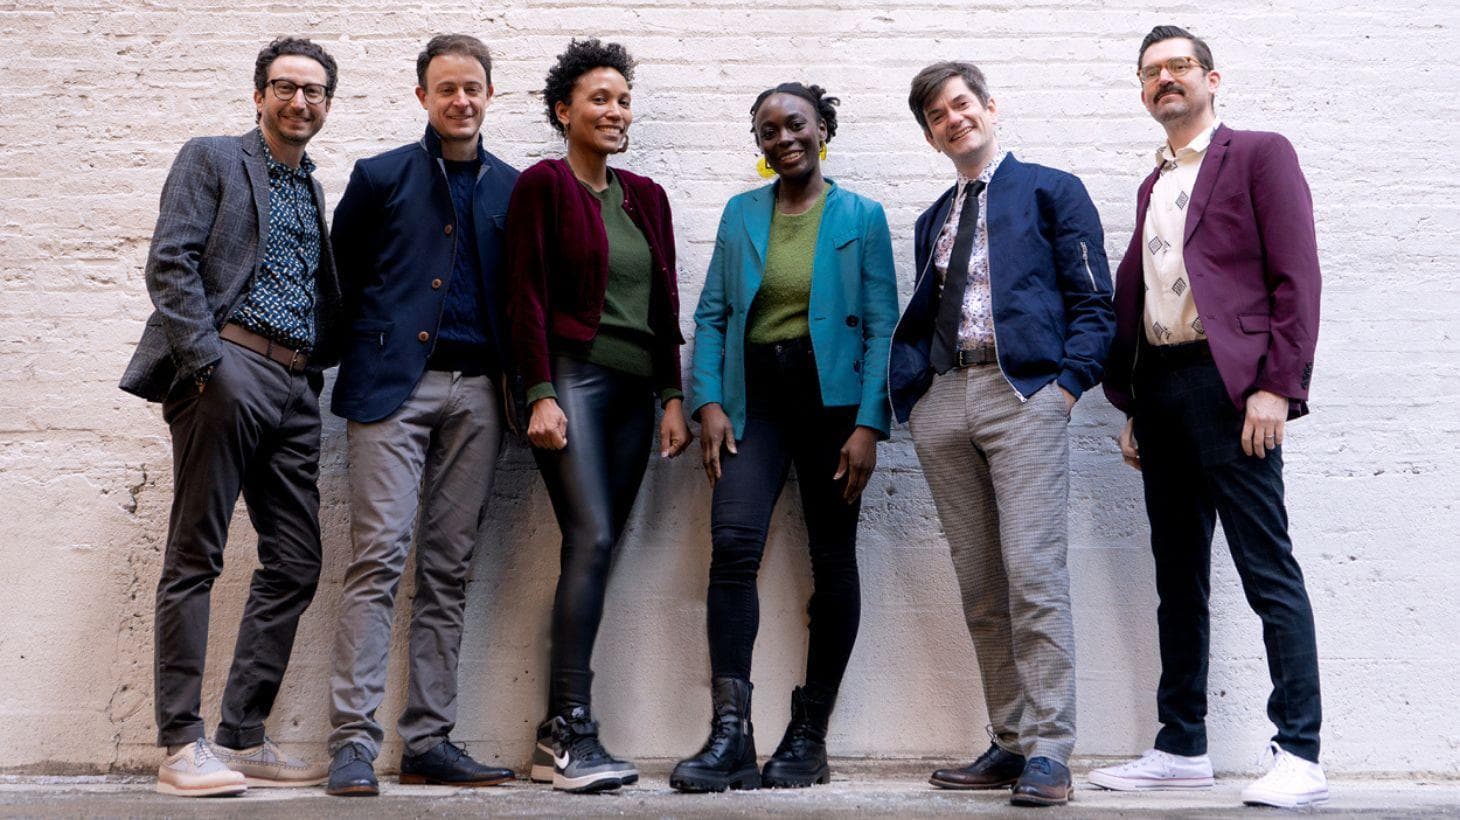 Six ensemble members pose for a picture.